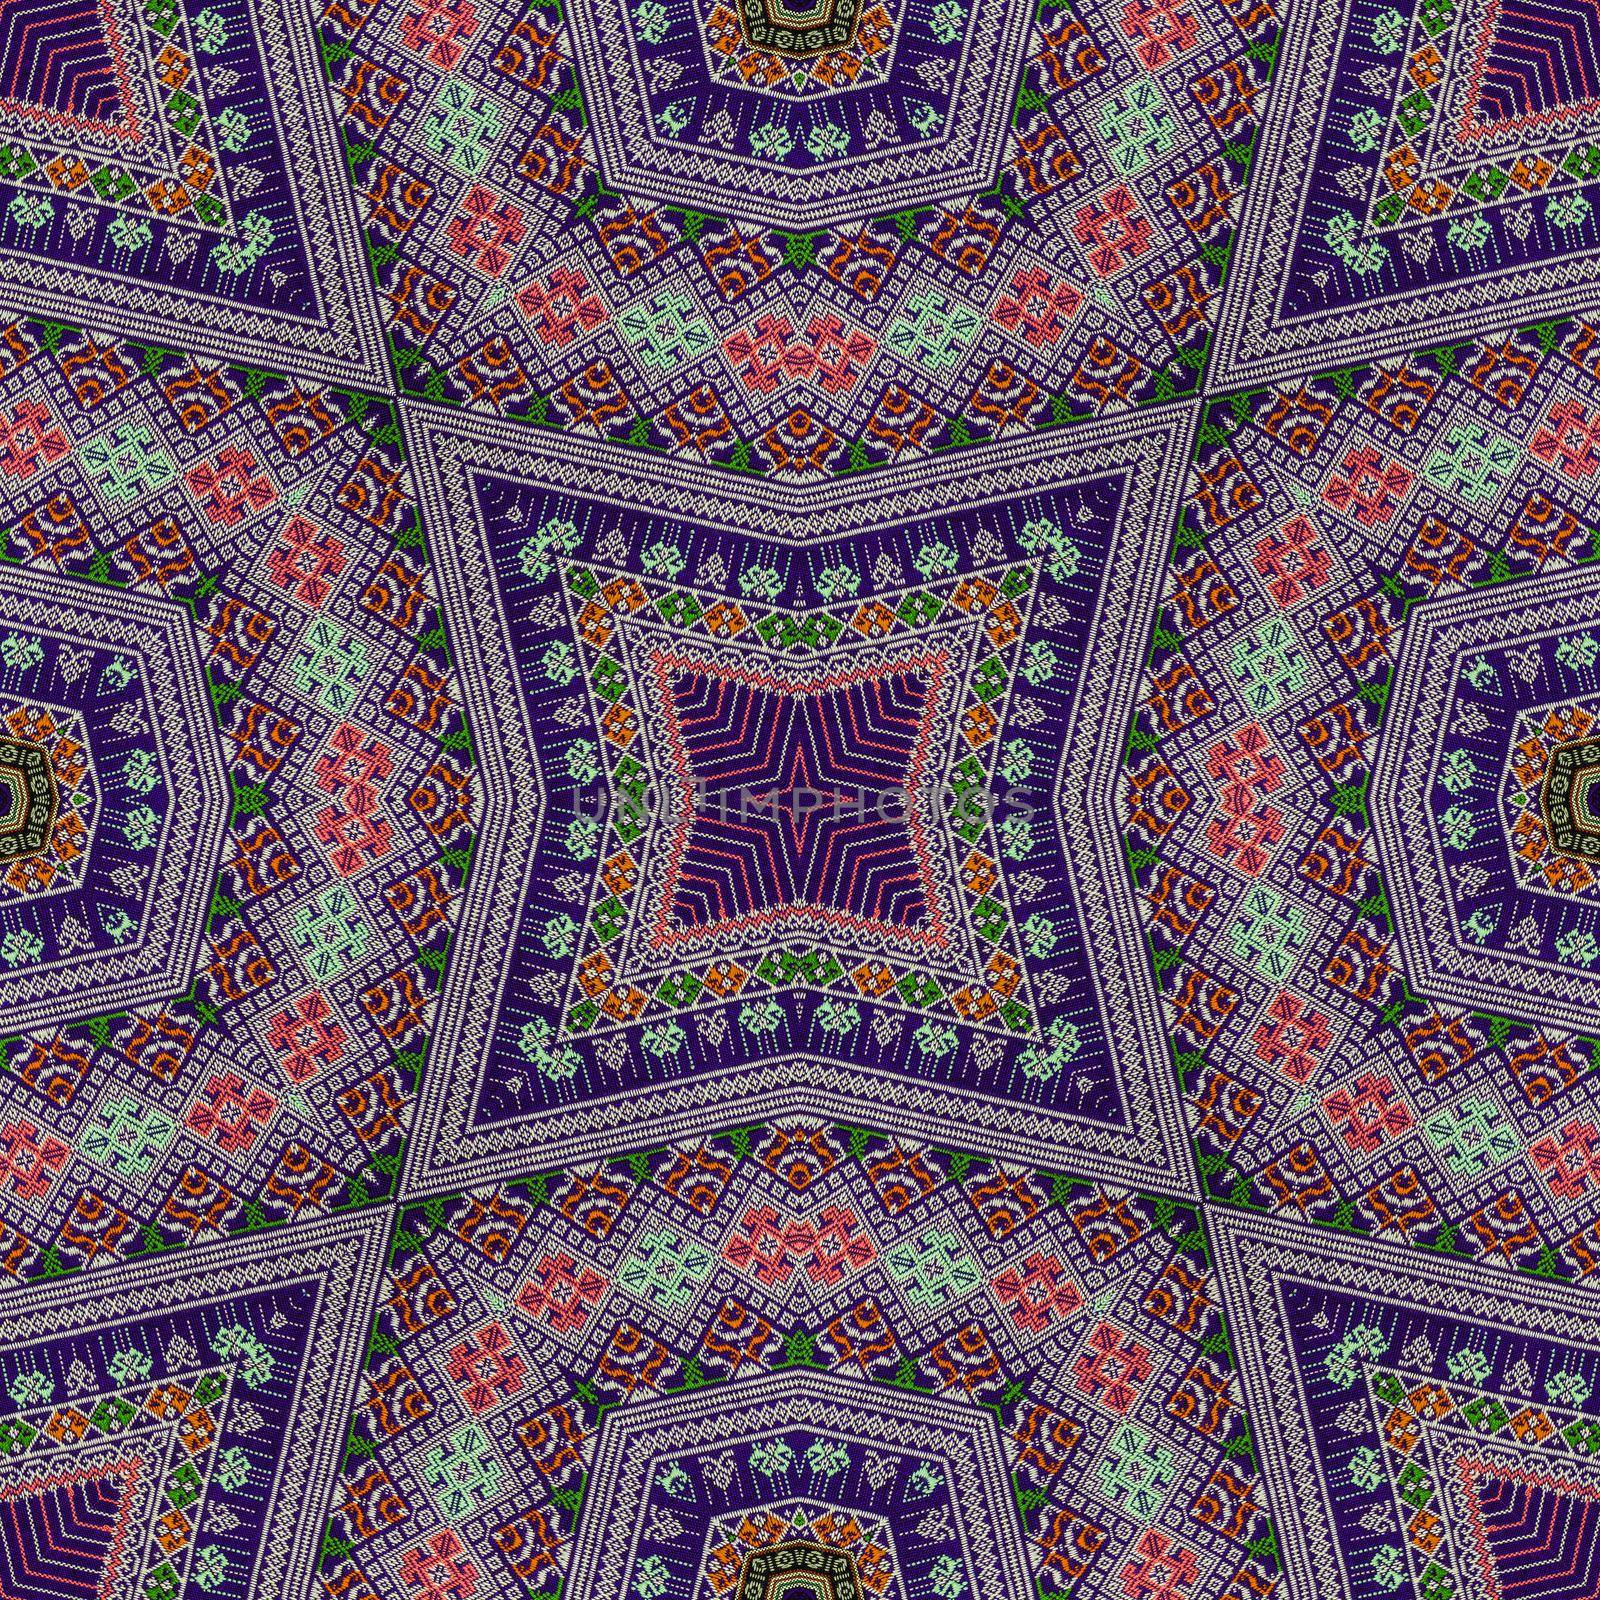 Colorful abstract kaleidoscope or endless pattern by NuwatPhoto